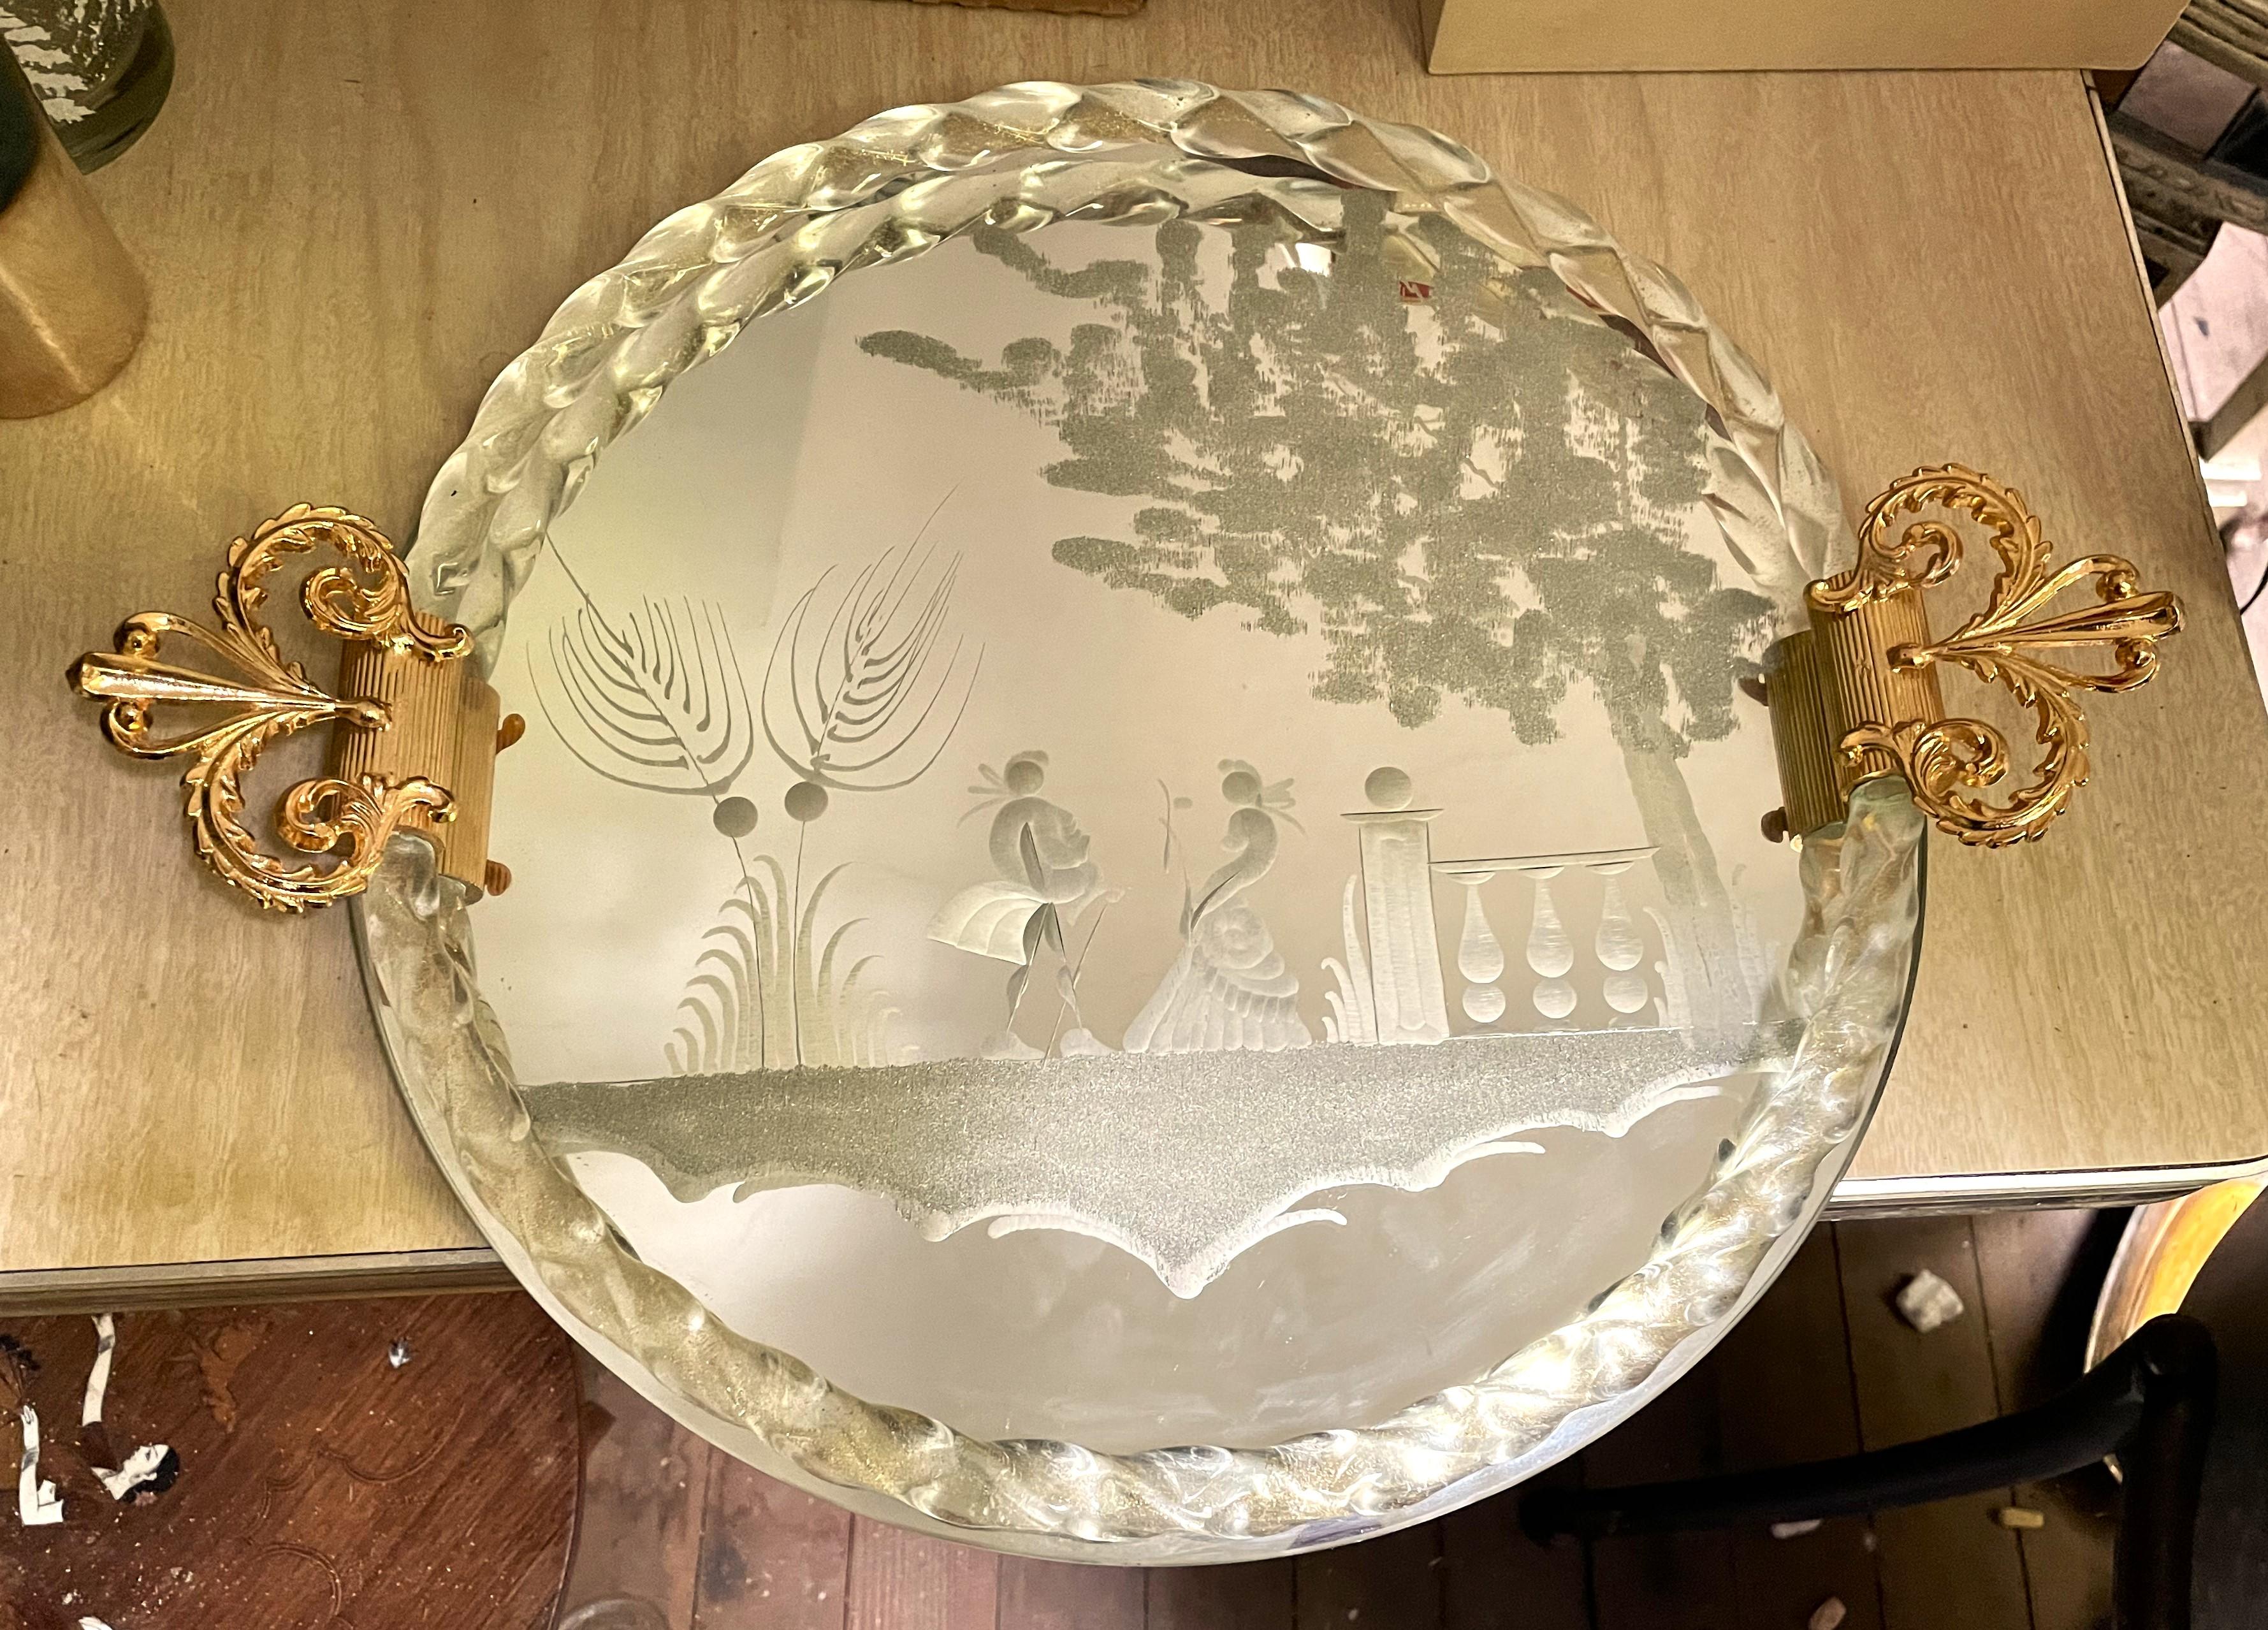 What an absolutely sweet and decorative mirrored tray with a reverse etched romantic Victorian scene of two lovers meeting in a garden, both in full gala appropriate clothing. The scene is surrounded by a border of twisted glass with sparkling gold